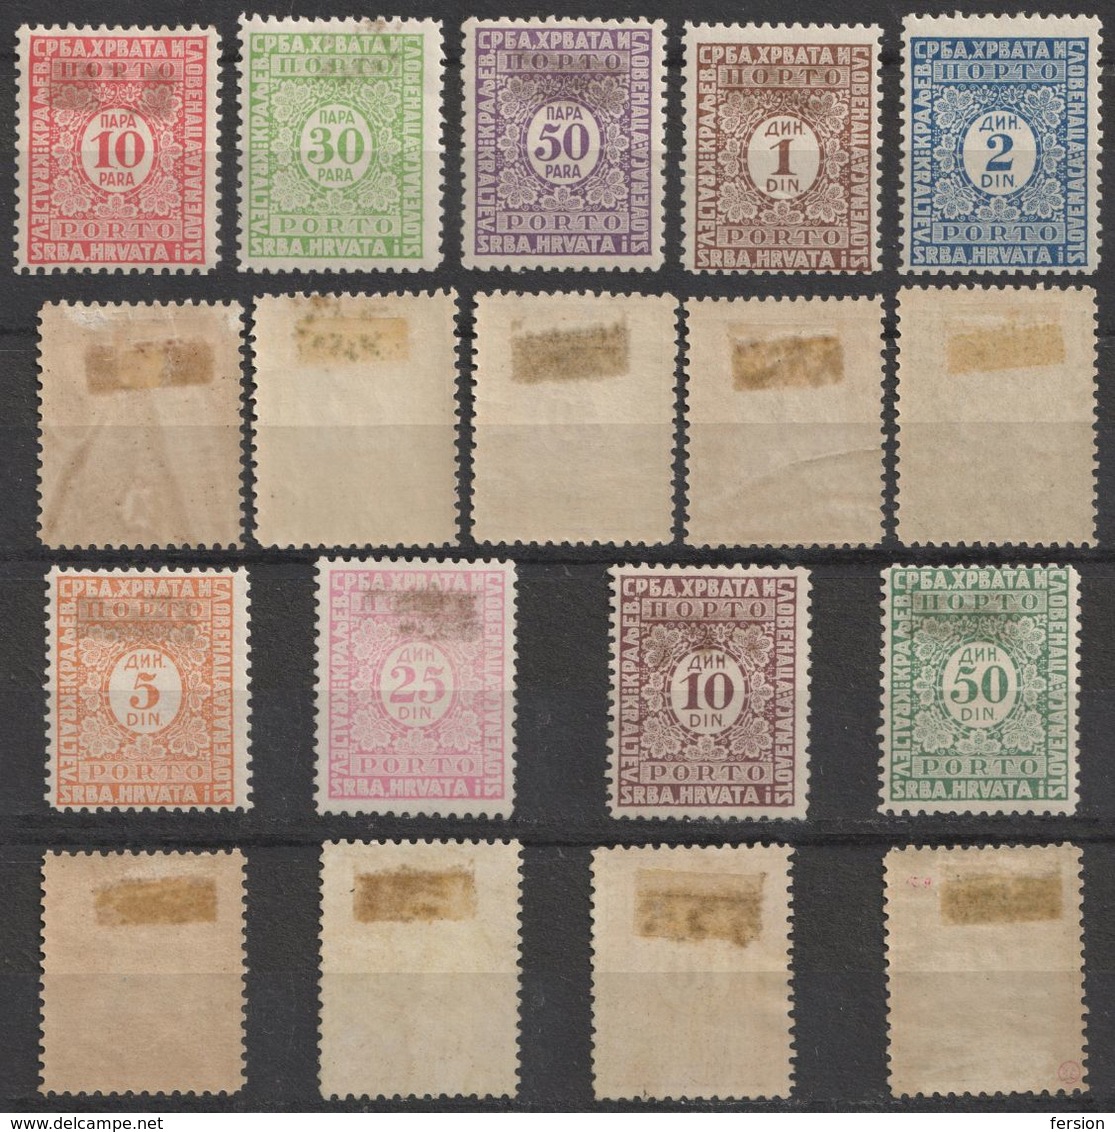 1921 1922 1923 1924 1931 - SHS Yugoslavia - Postage DUE PORTO - Mi. 53-61 II - MH With Hinged Patches - Timbres-taxe